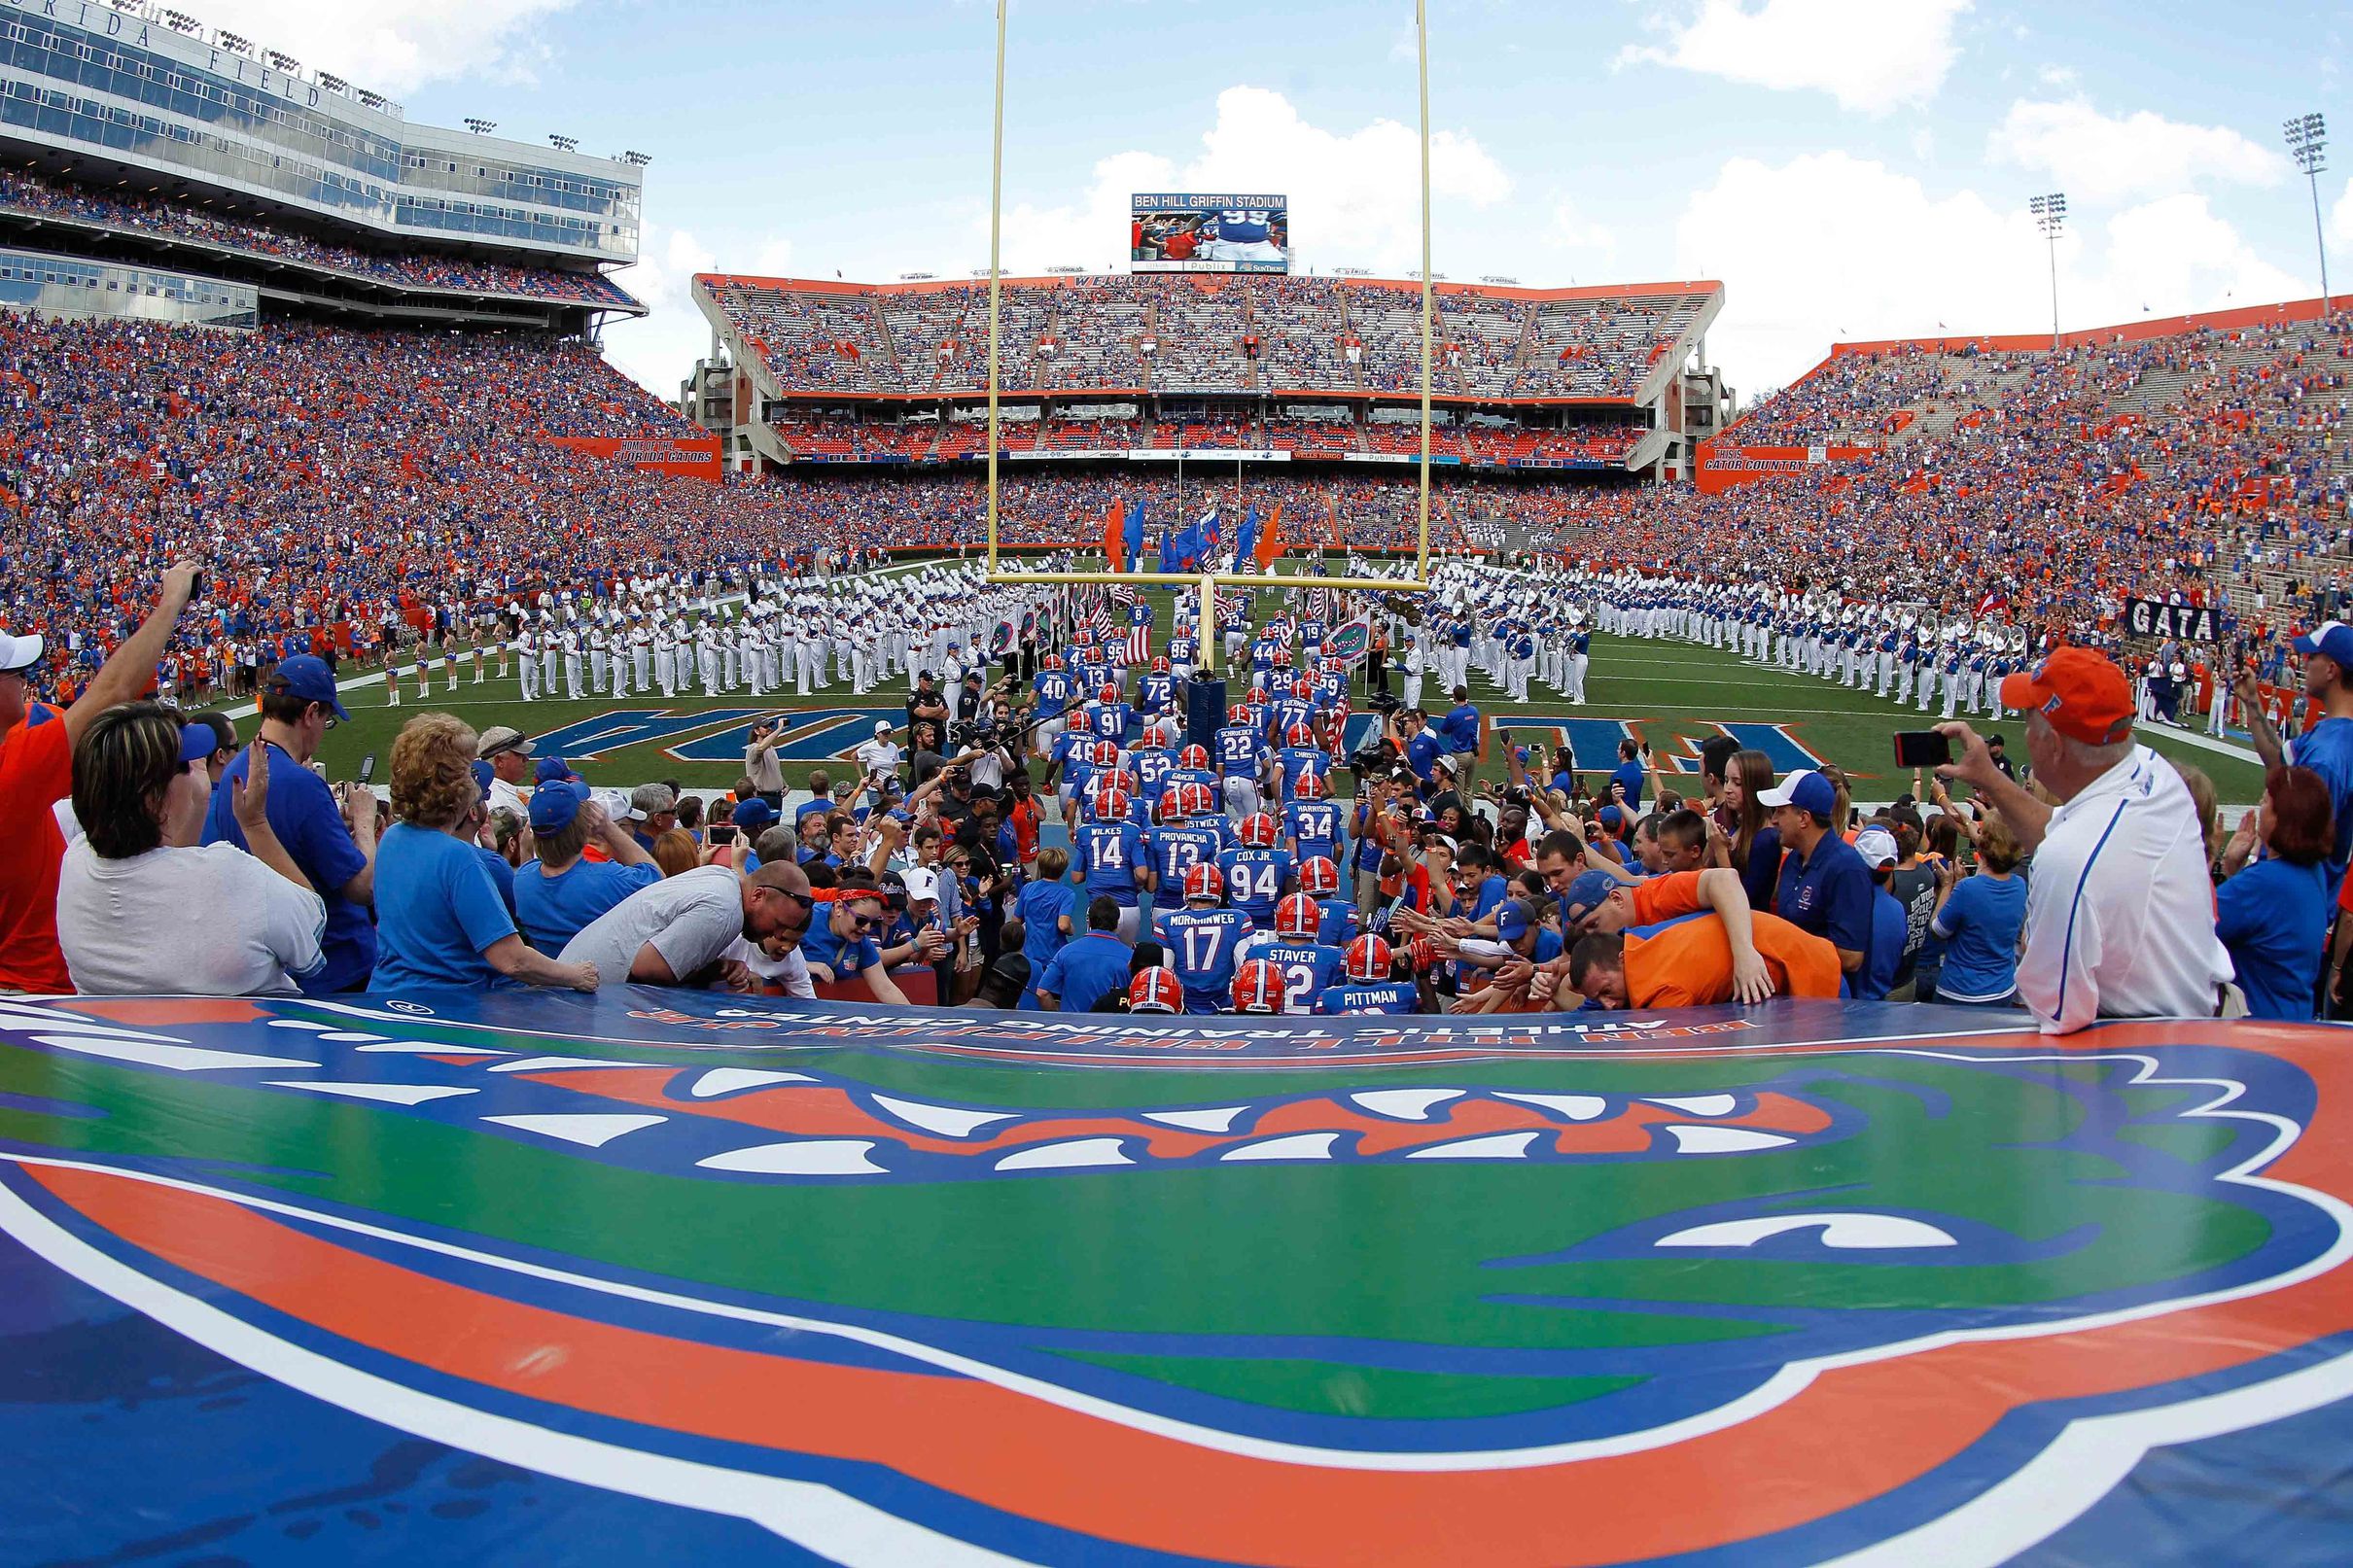 Florida's Poll Position Gators unranked in 2014 preseason USA TODAY